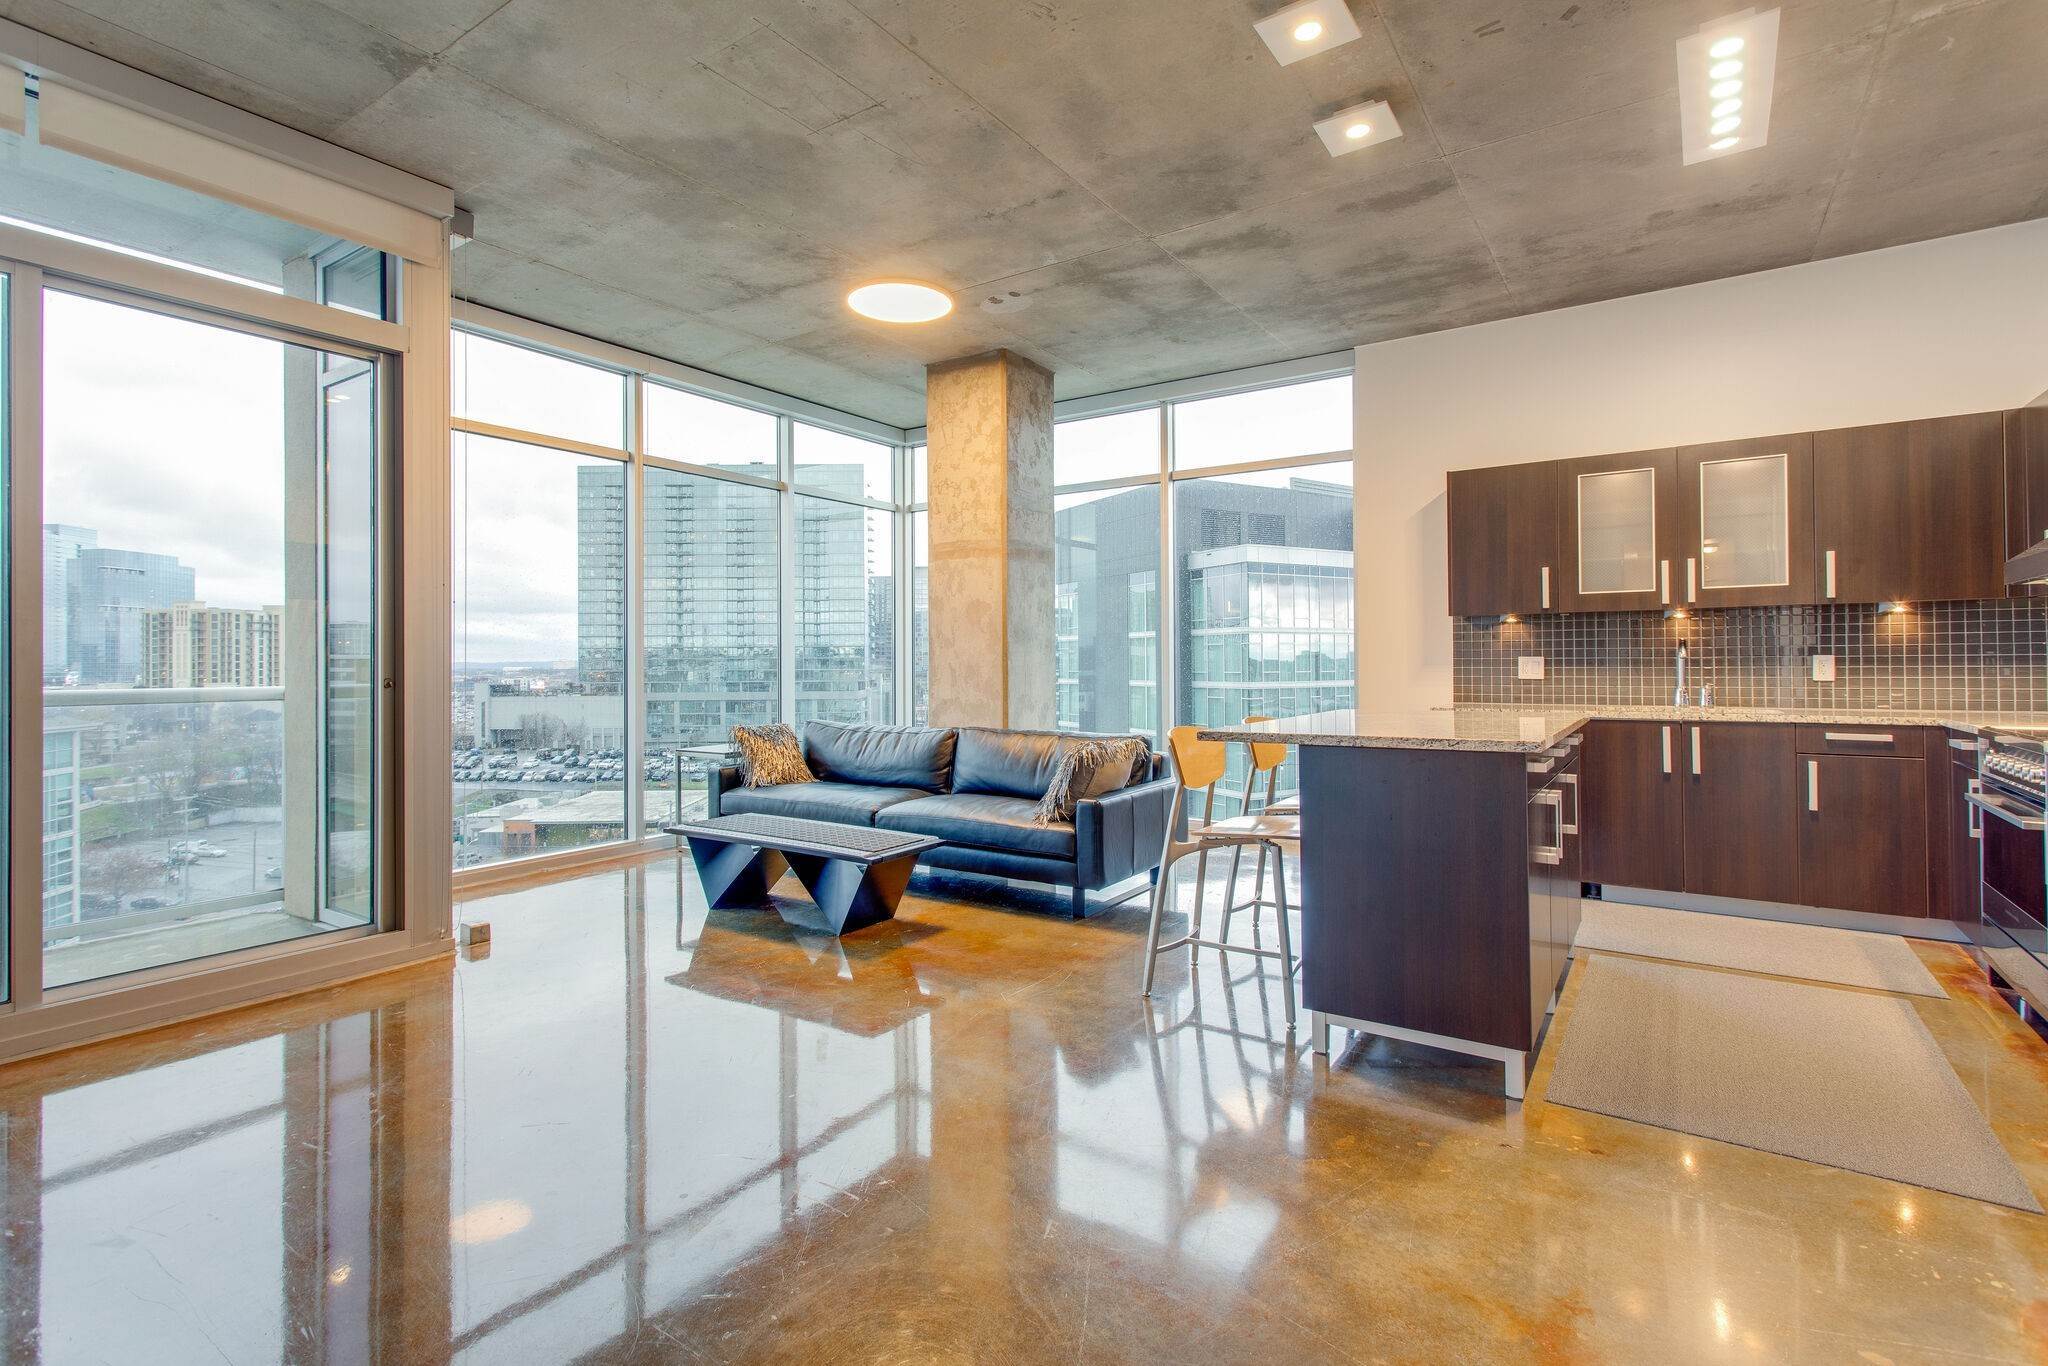 1. High Rise for Sale at 600 12th Ave, S Nashville, Tennessee 37203 United States